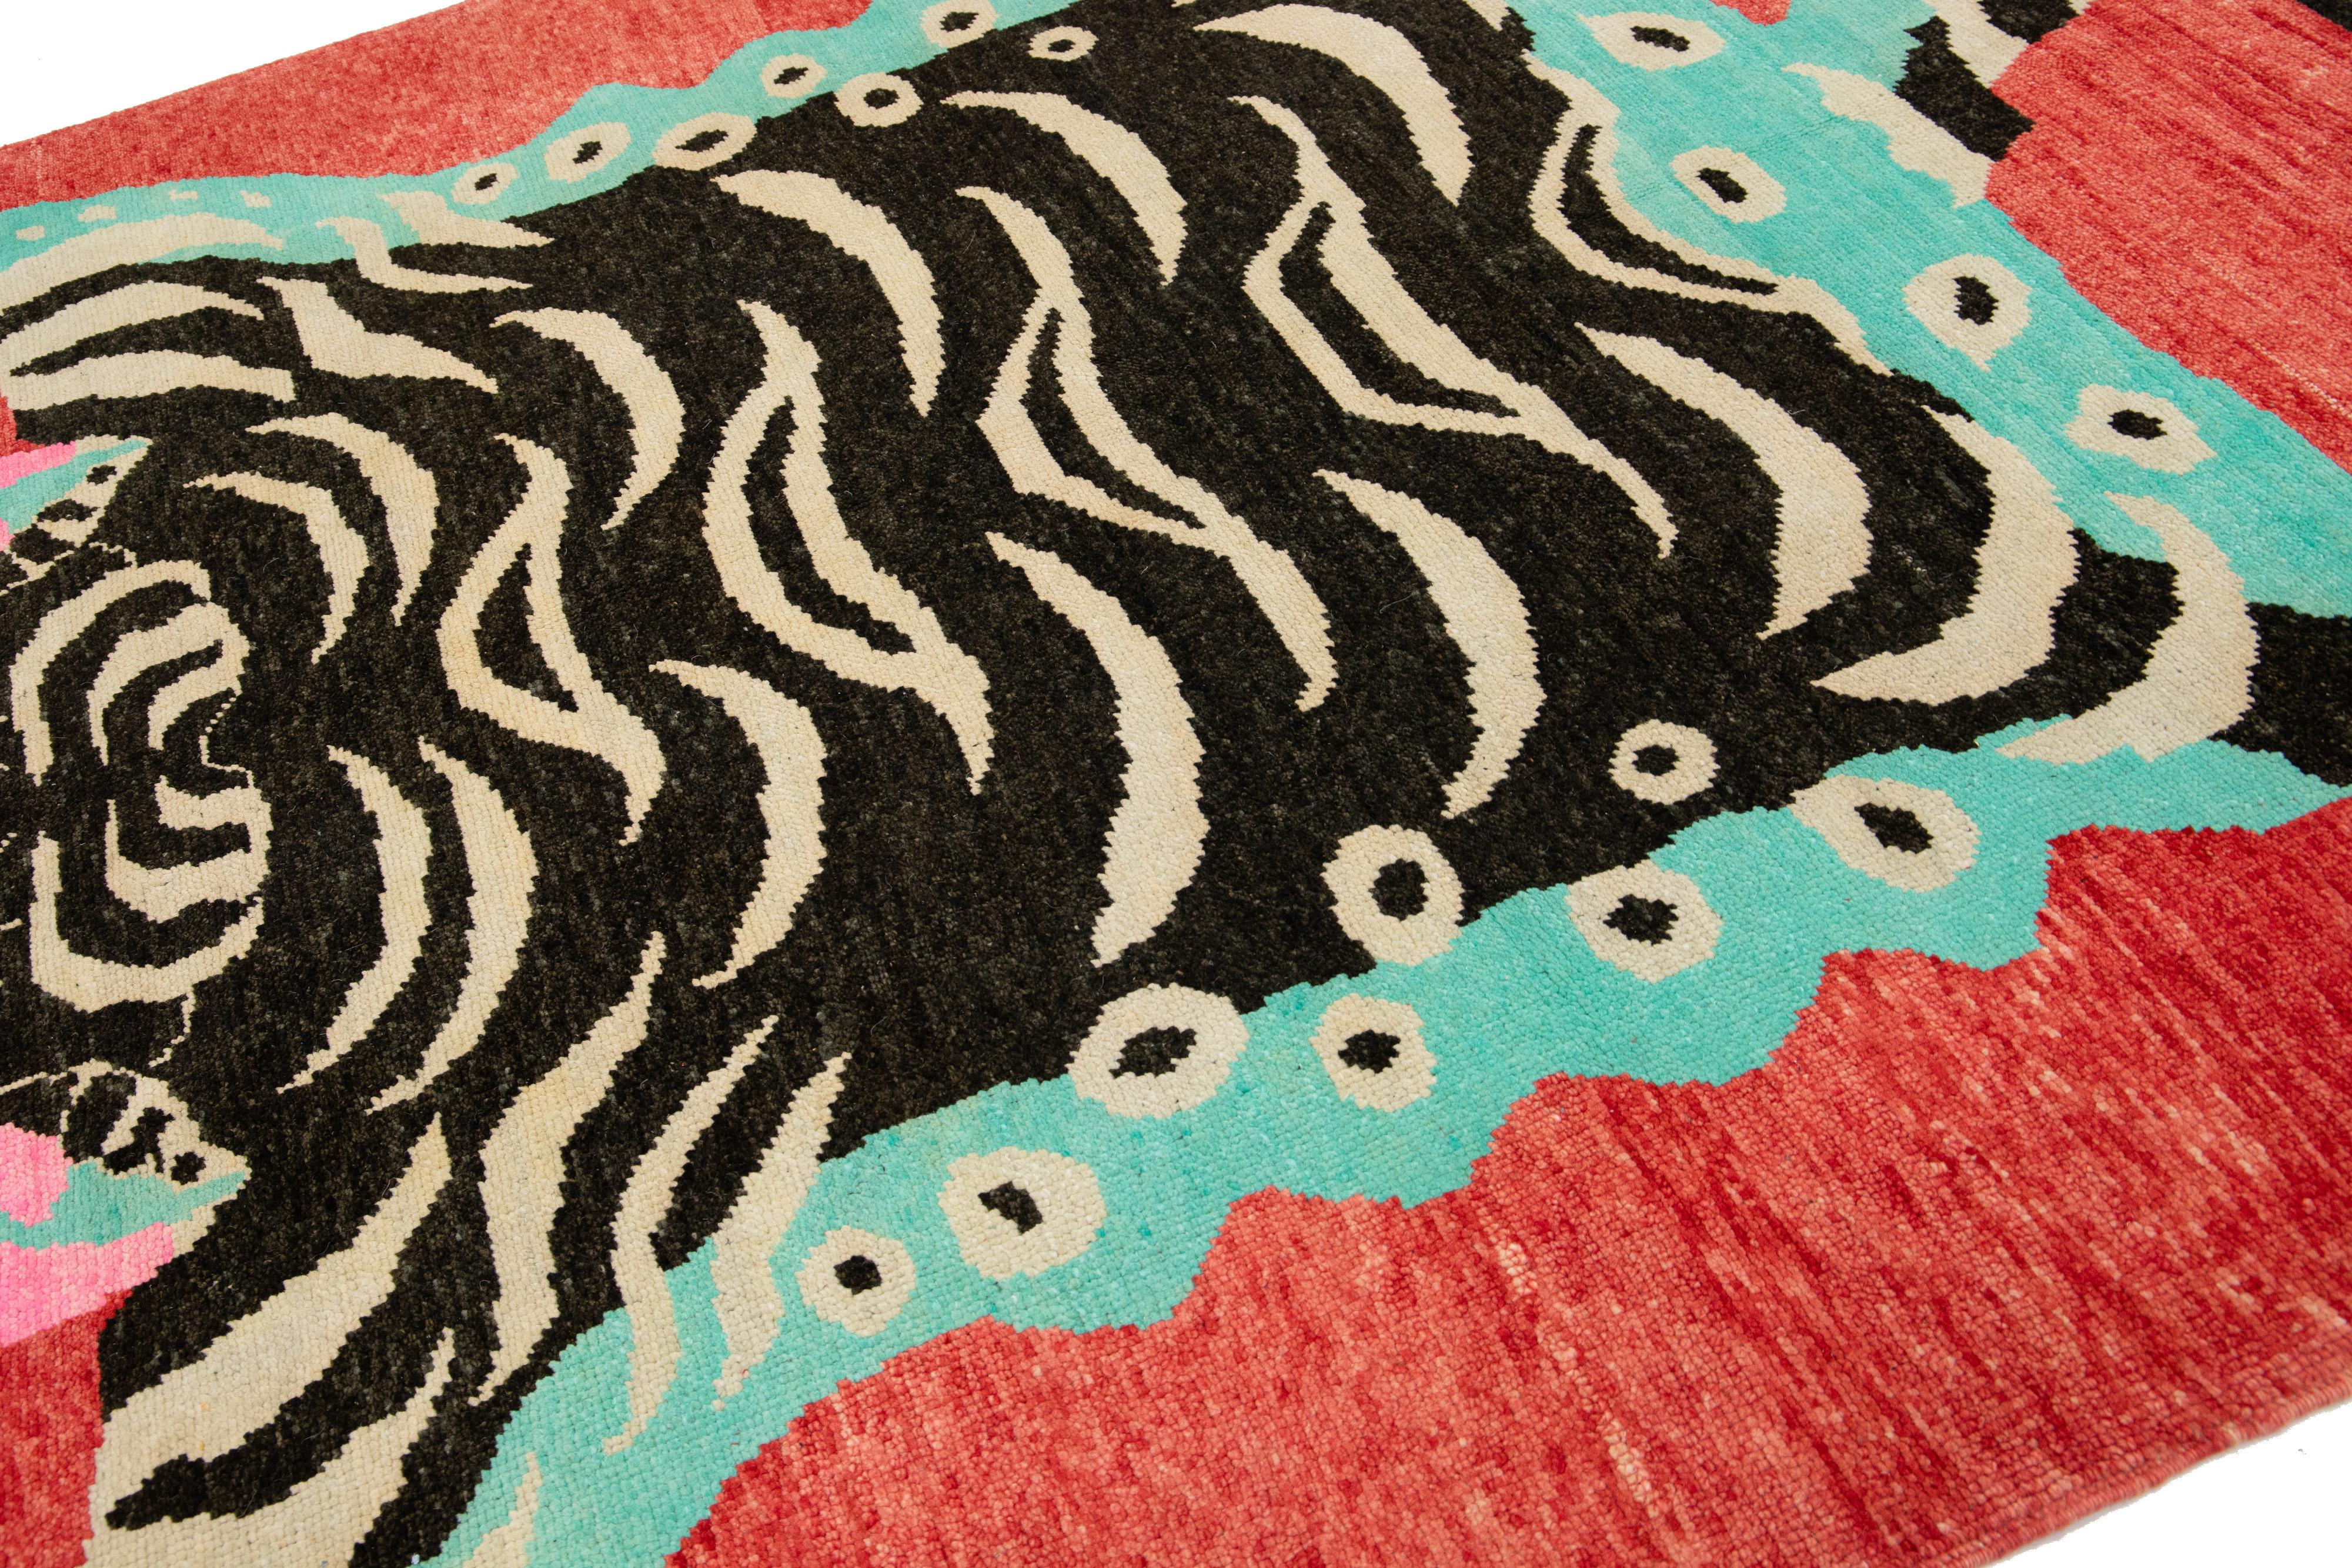 Contemporary Pictorial Designed Handmade Wool Rug In Red In New Condition For Sale In Norwalk, CT